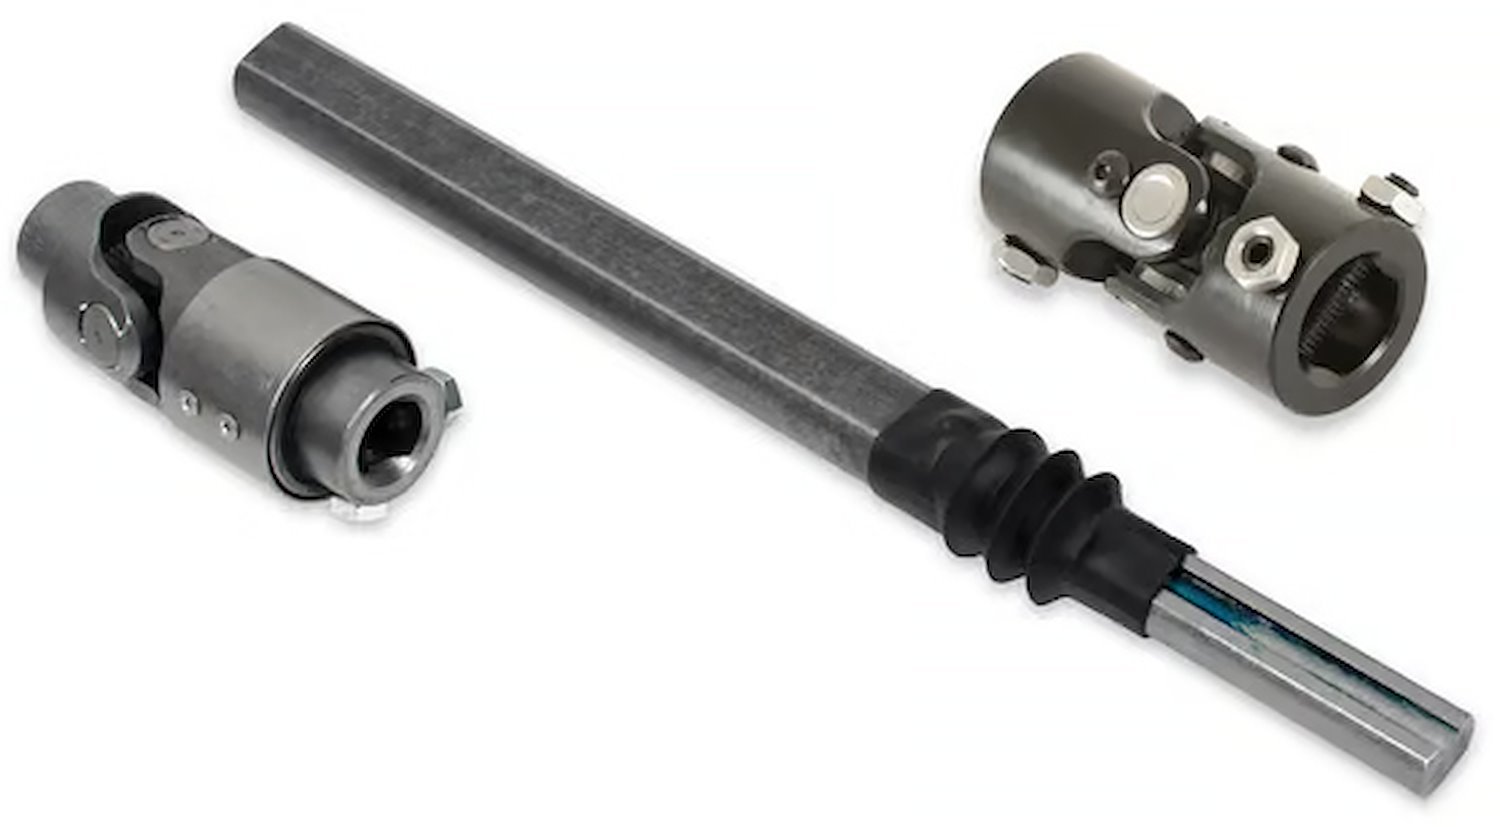 092542DS Steering Shaft Kit with Vibration Reducer for 1973-1978 GM C10, GMC C15 Trucks for Stock Column to DSE Gear